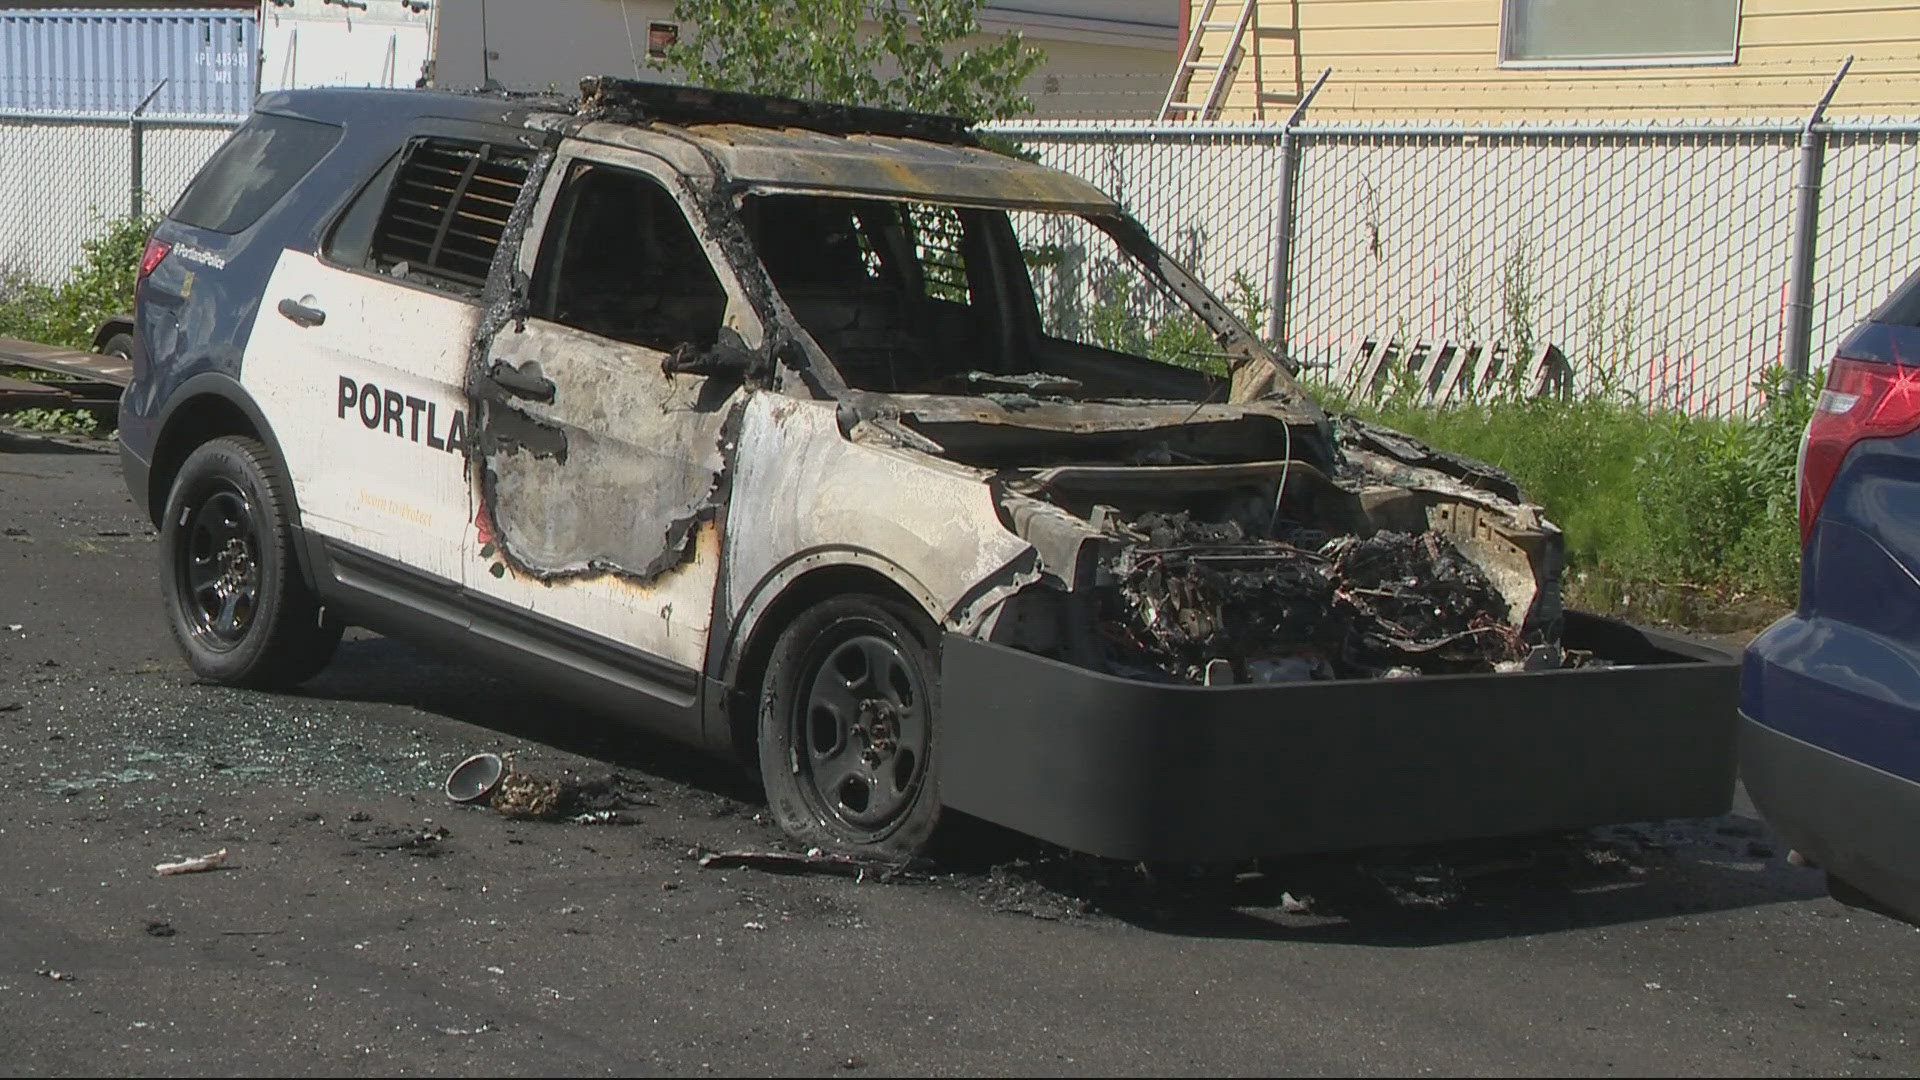 Portland police said a masked suspect cut through a fence around a police training lot and set 15 vehicles alight.